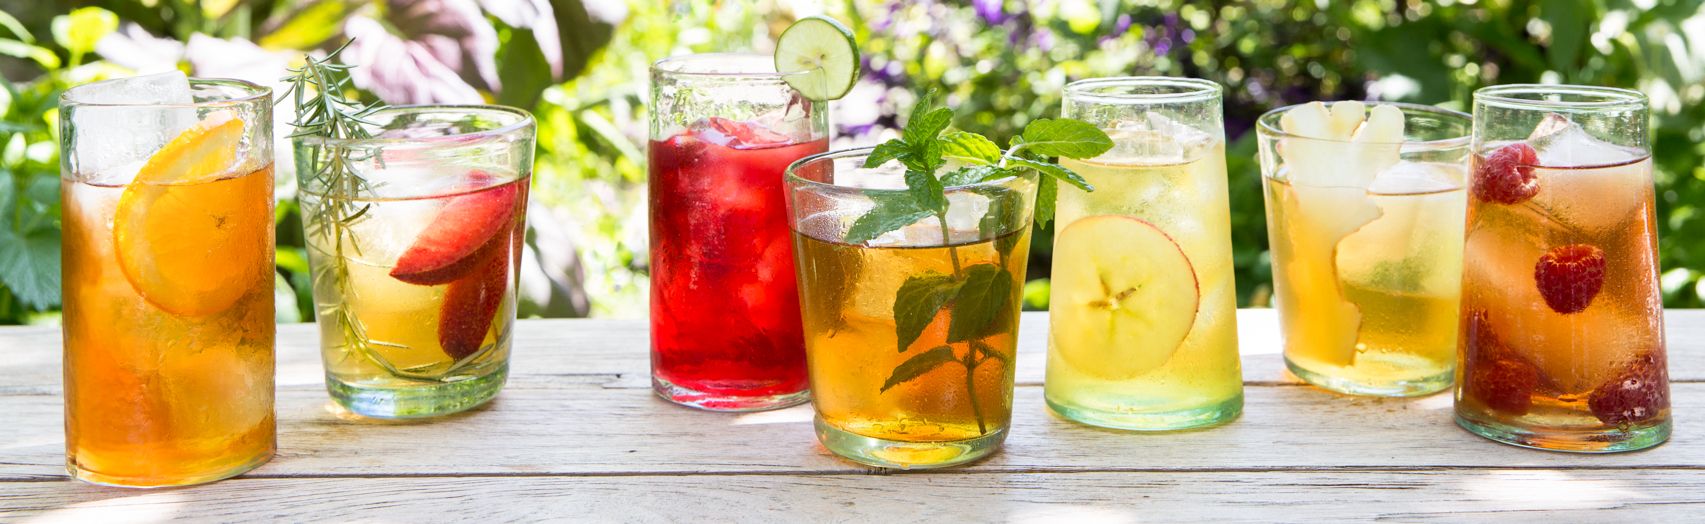 Our Best Herbal Teas on Ice